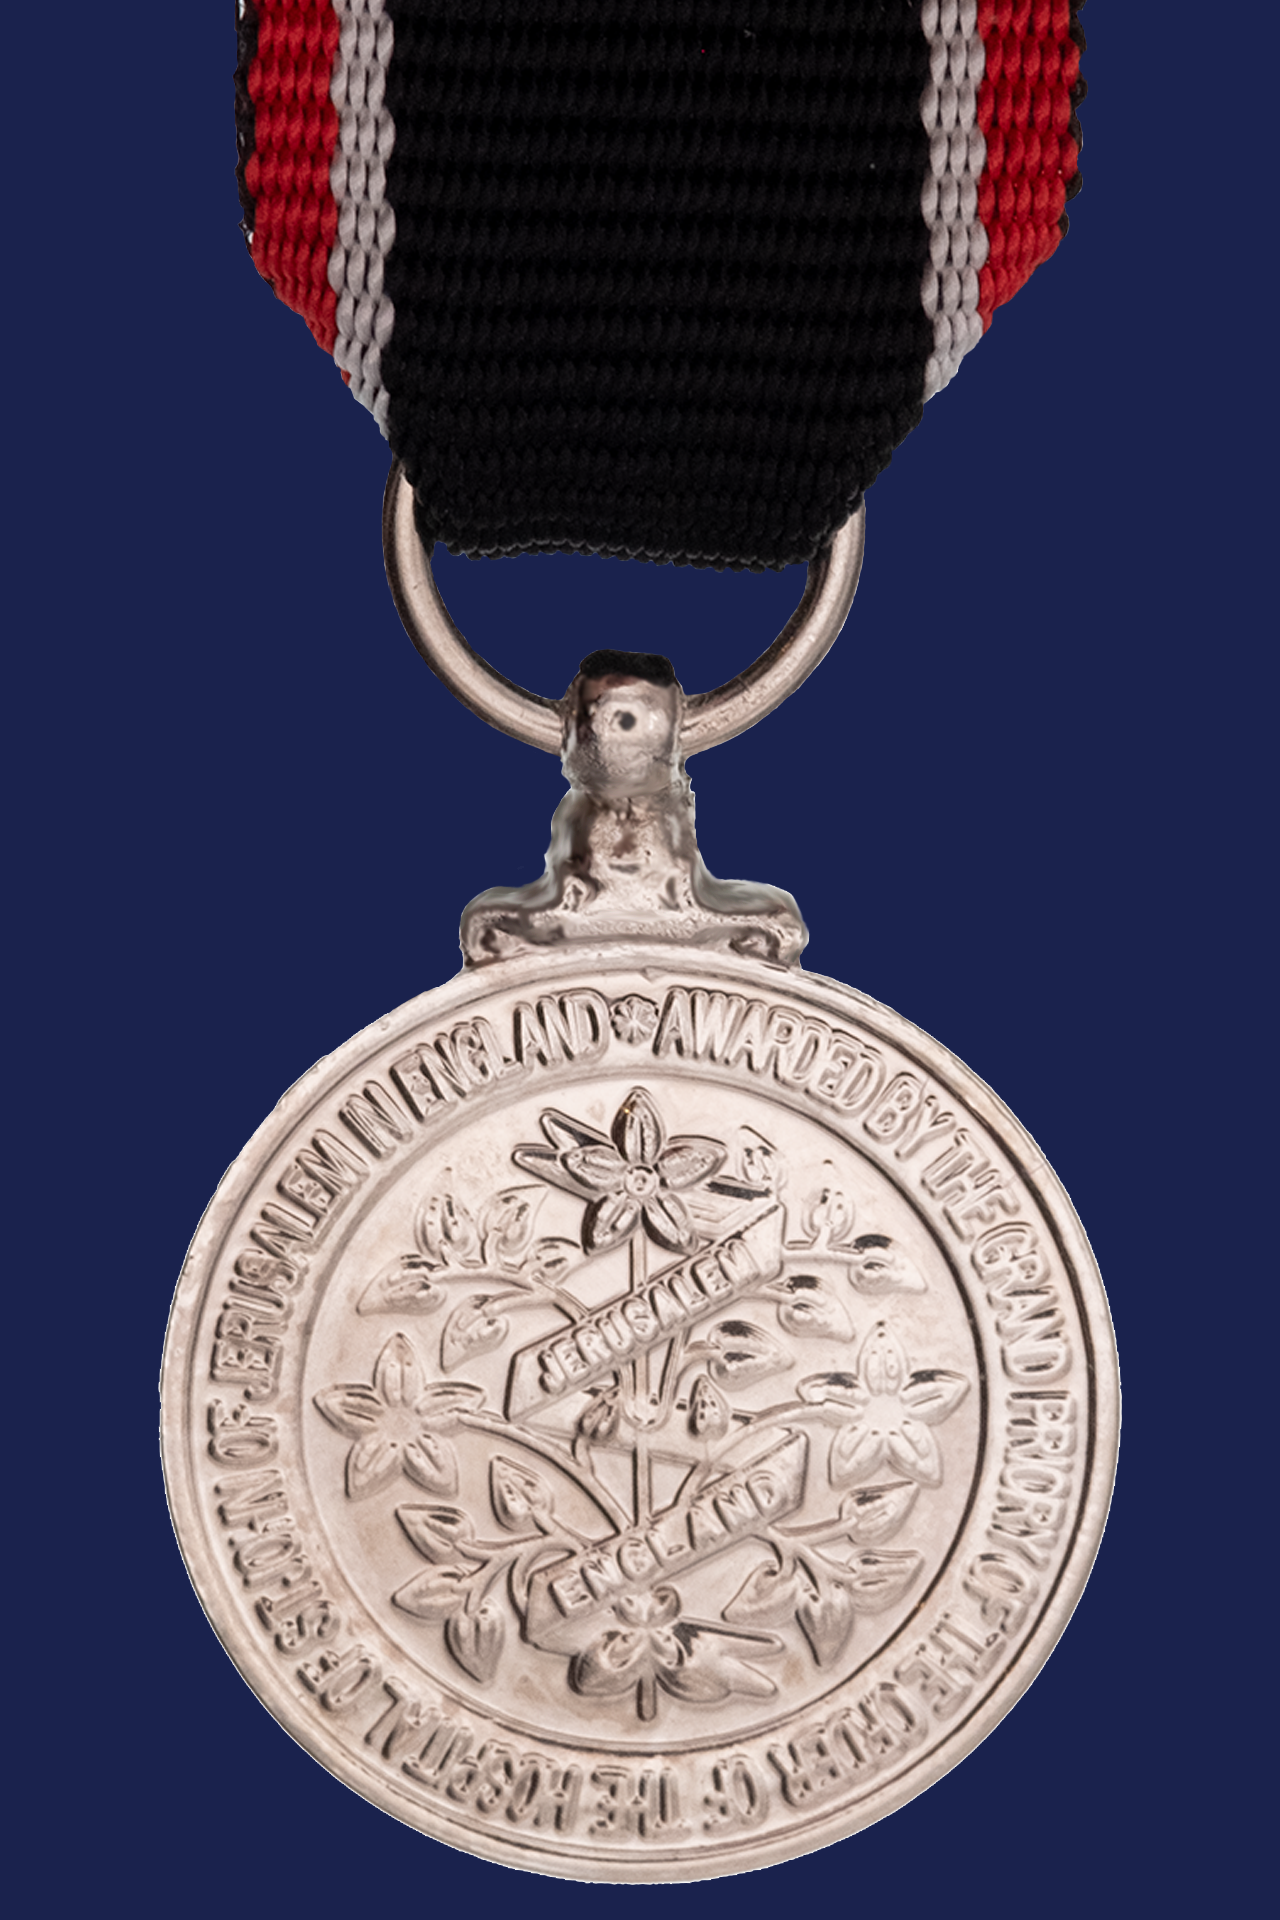 Worcestershire Medal Service: Order of St John Life Saving Medal - Silver Plated